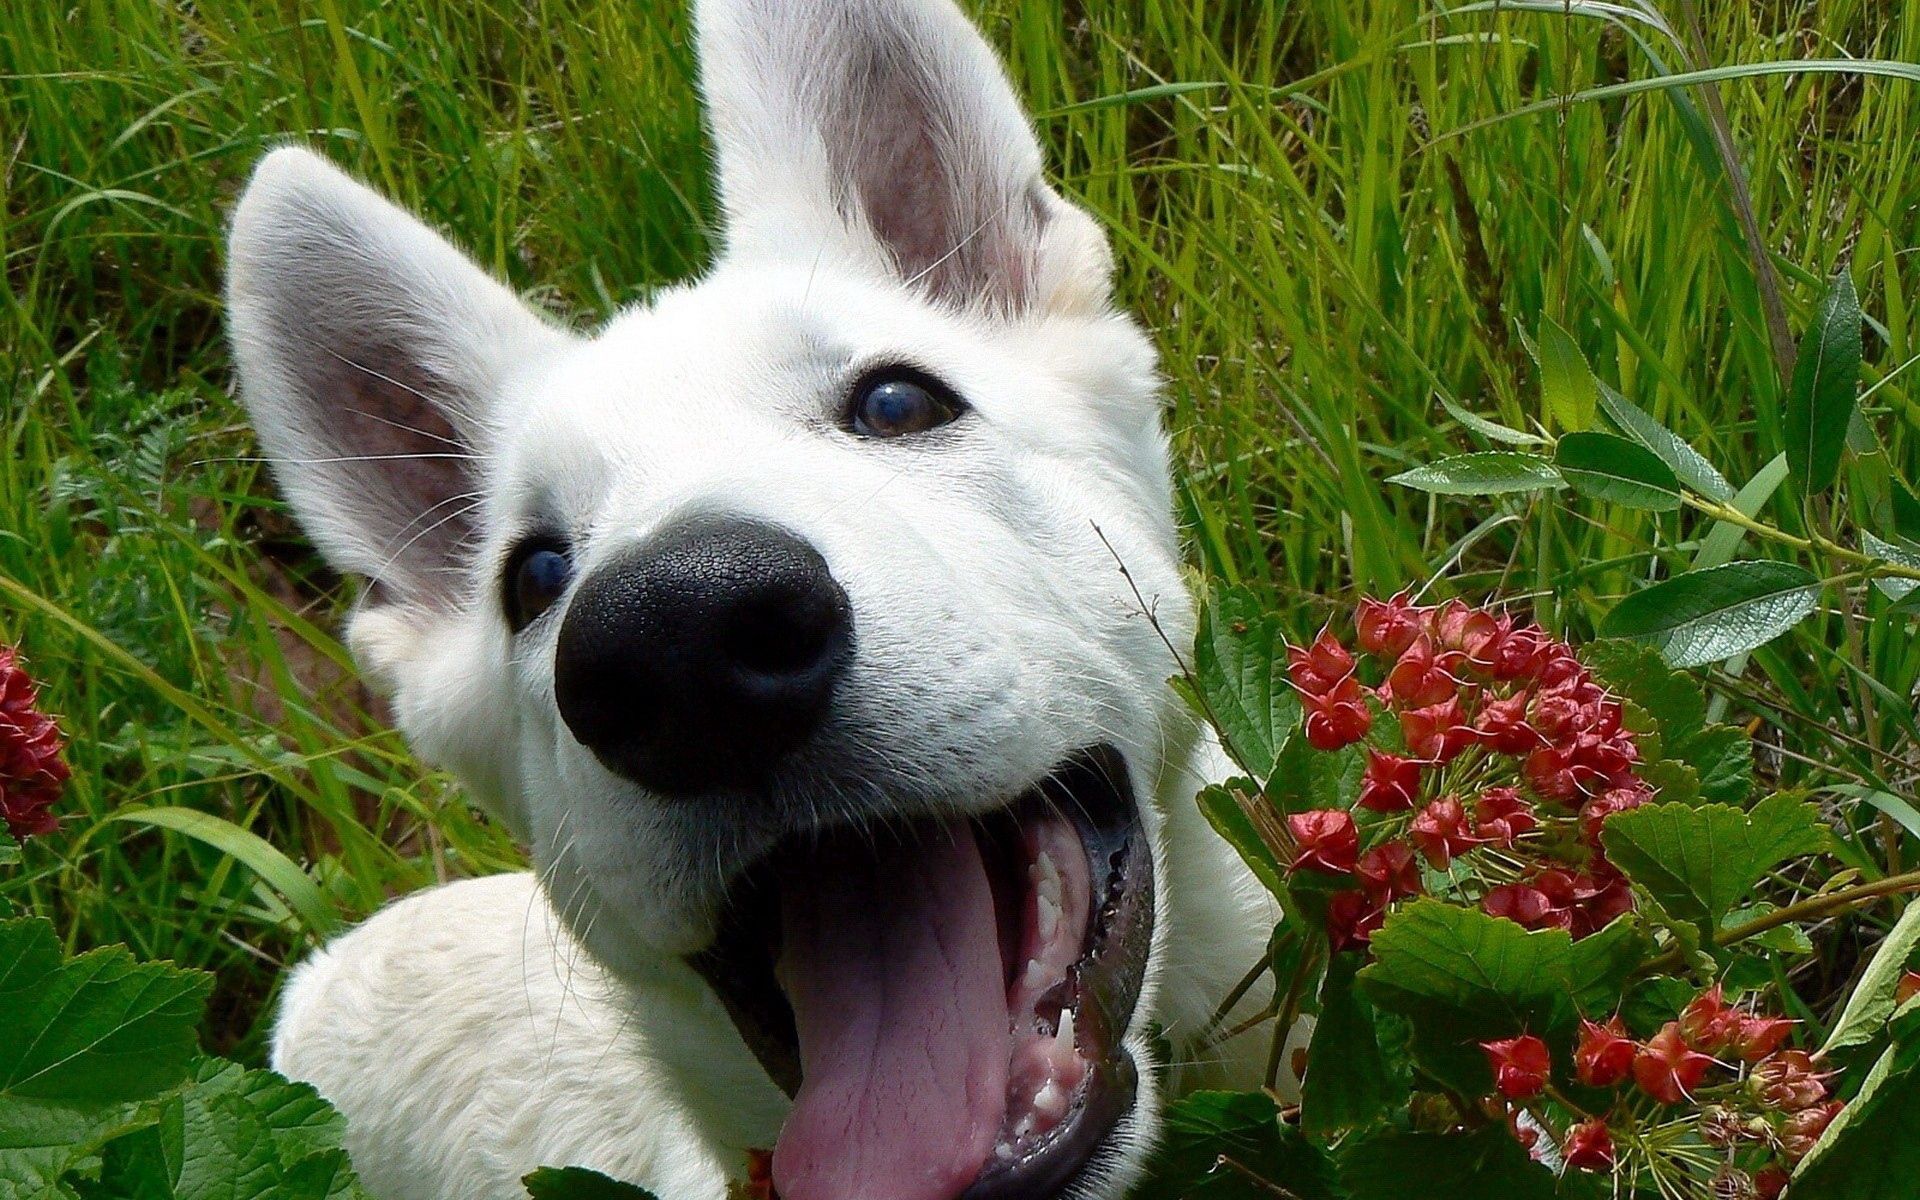 New Lock Screen Wallpapers animals, flowers, grass, leaves, dog, muzzle